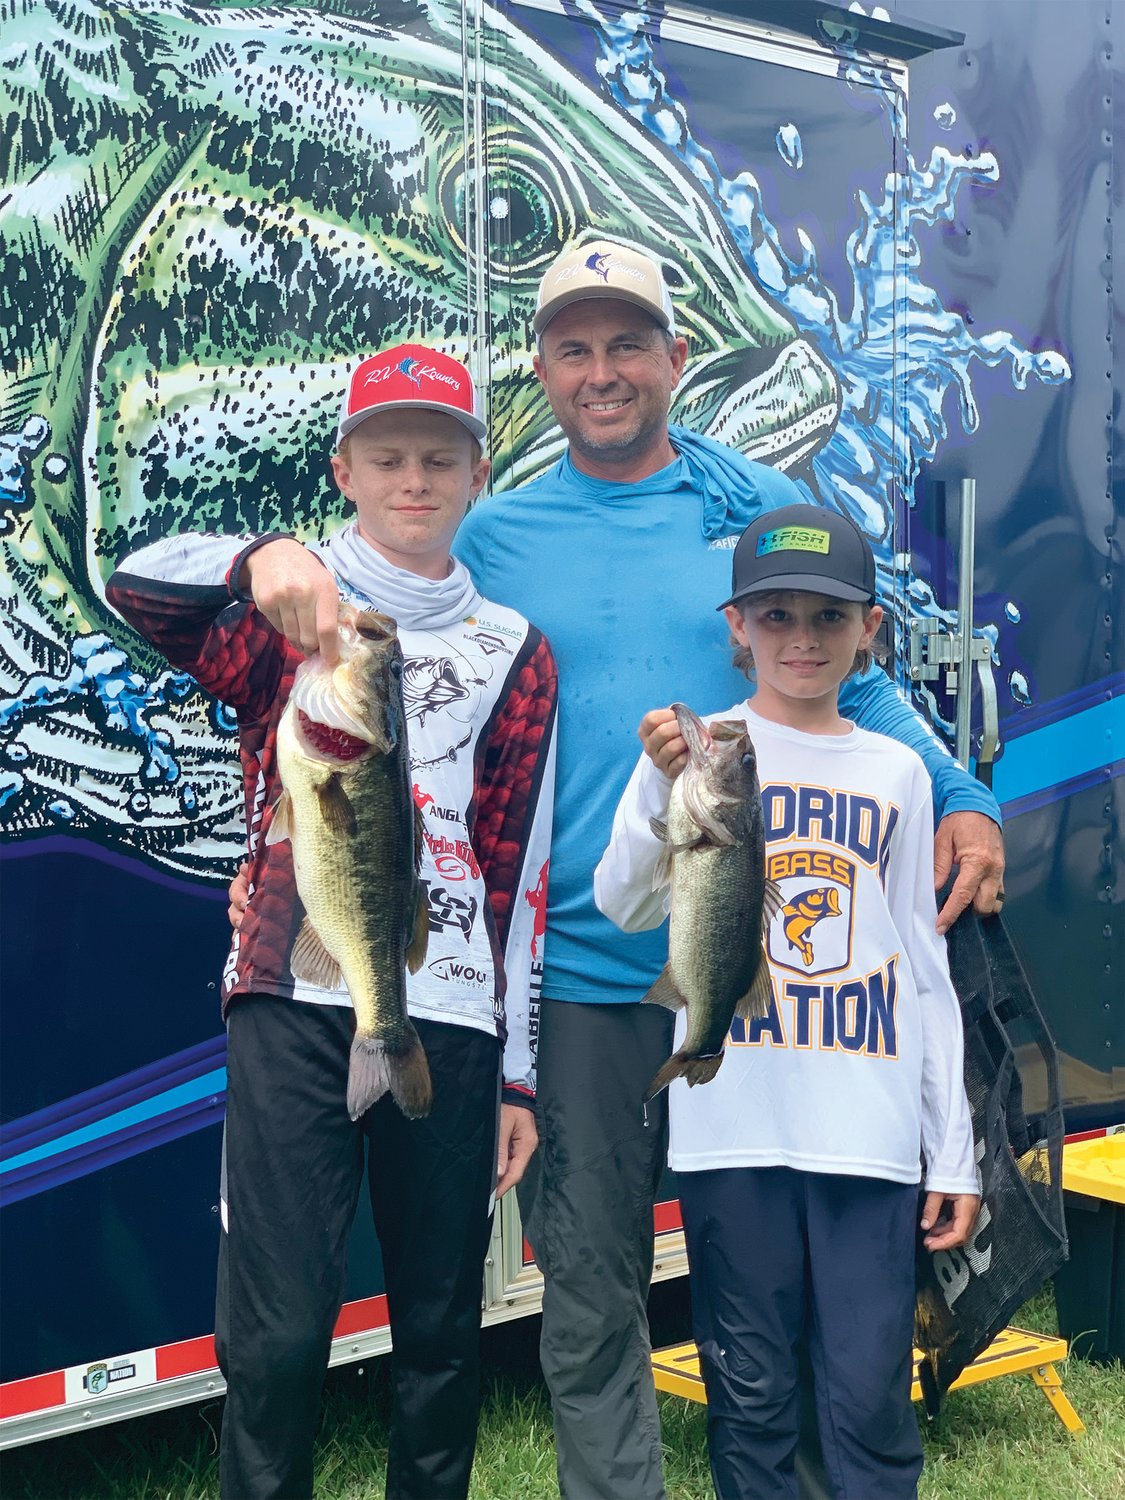 Jr Anglers Trevor Allen and Brody Allen punched their ticket to the 2021/2022 State Championship in June, 2022. Pictured is Boat Captain Brandon Allen and his sons Trevor and Brody.